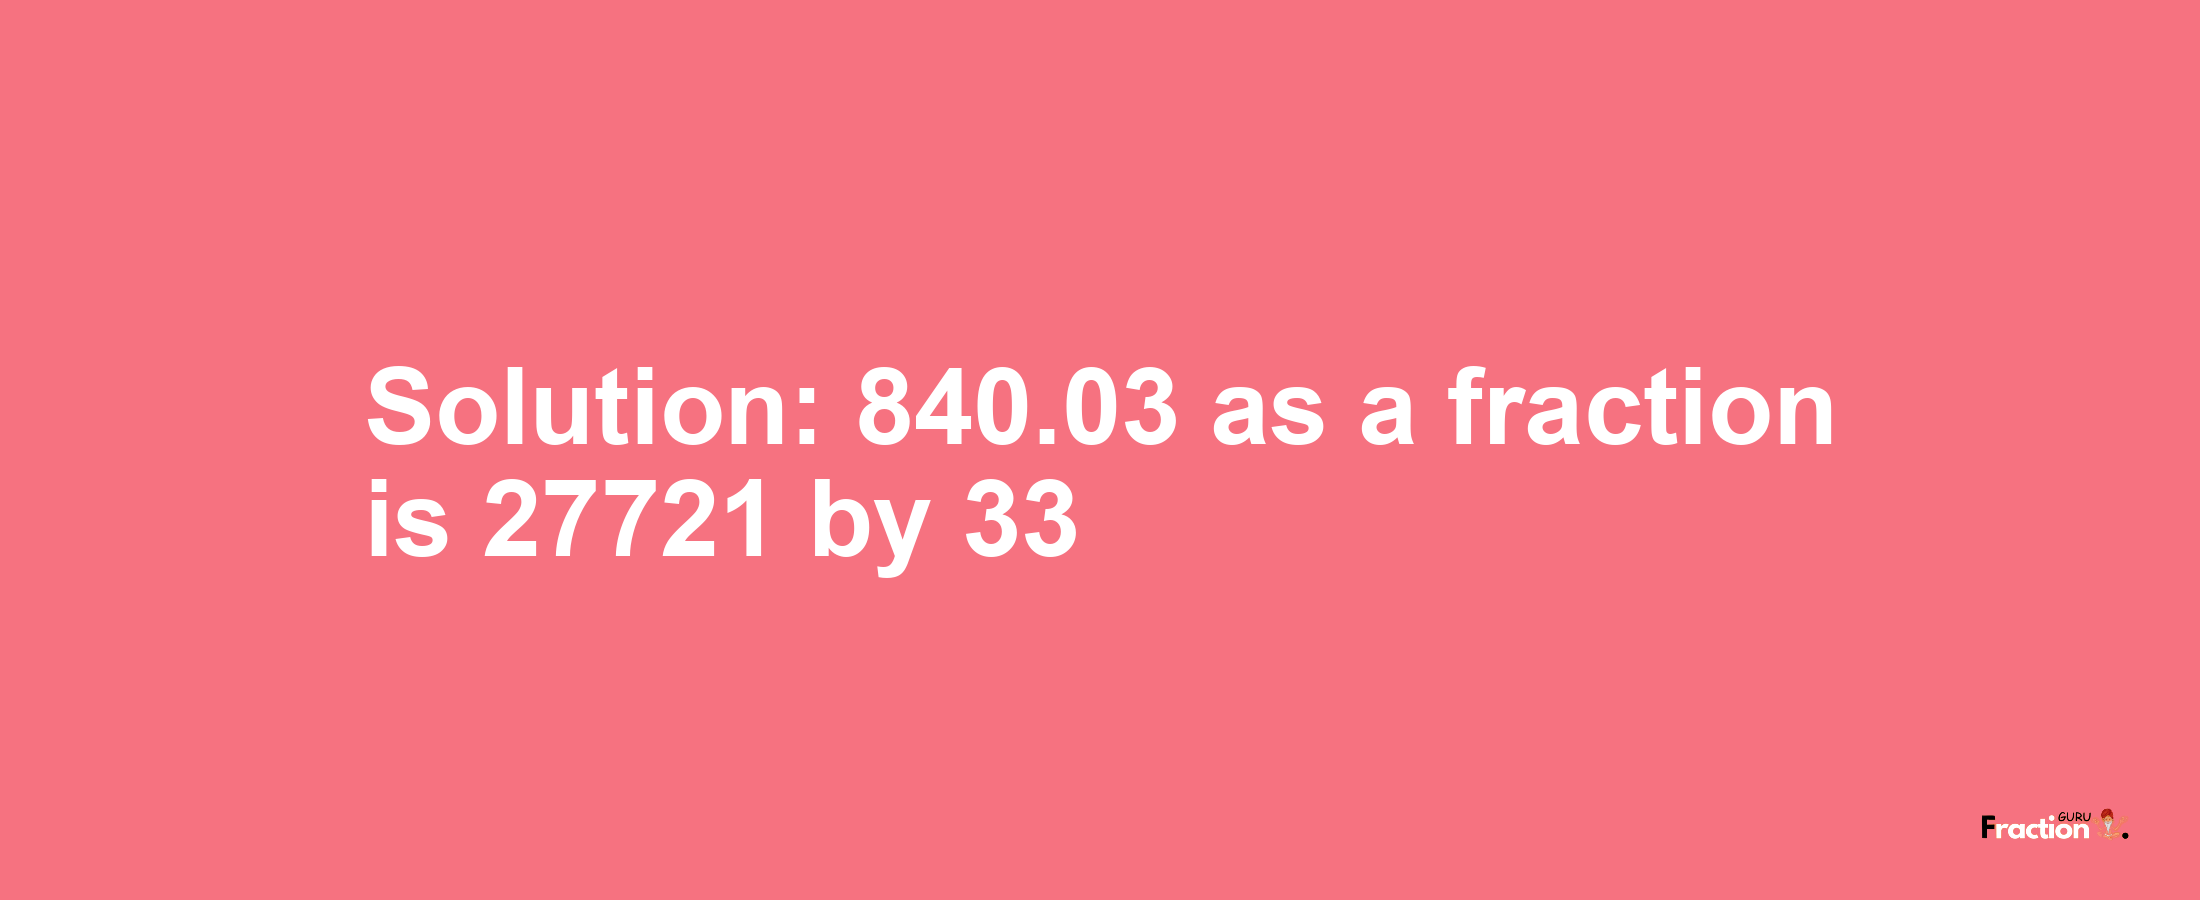 Solution:840.03 as a fraction is 27721/33